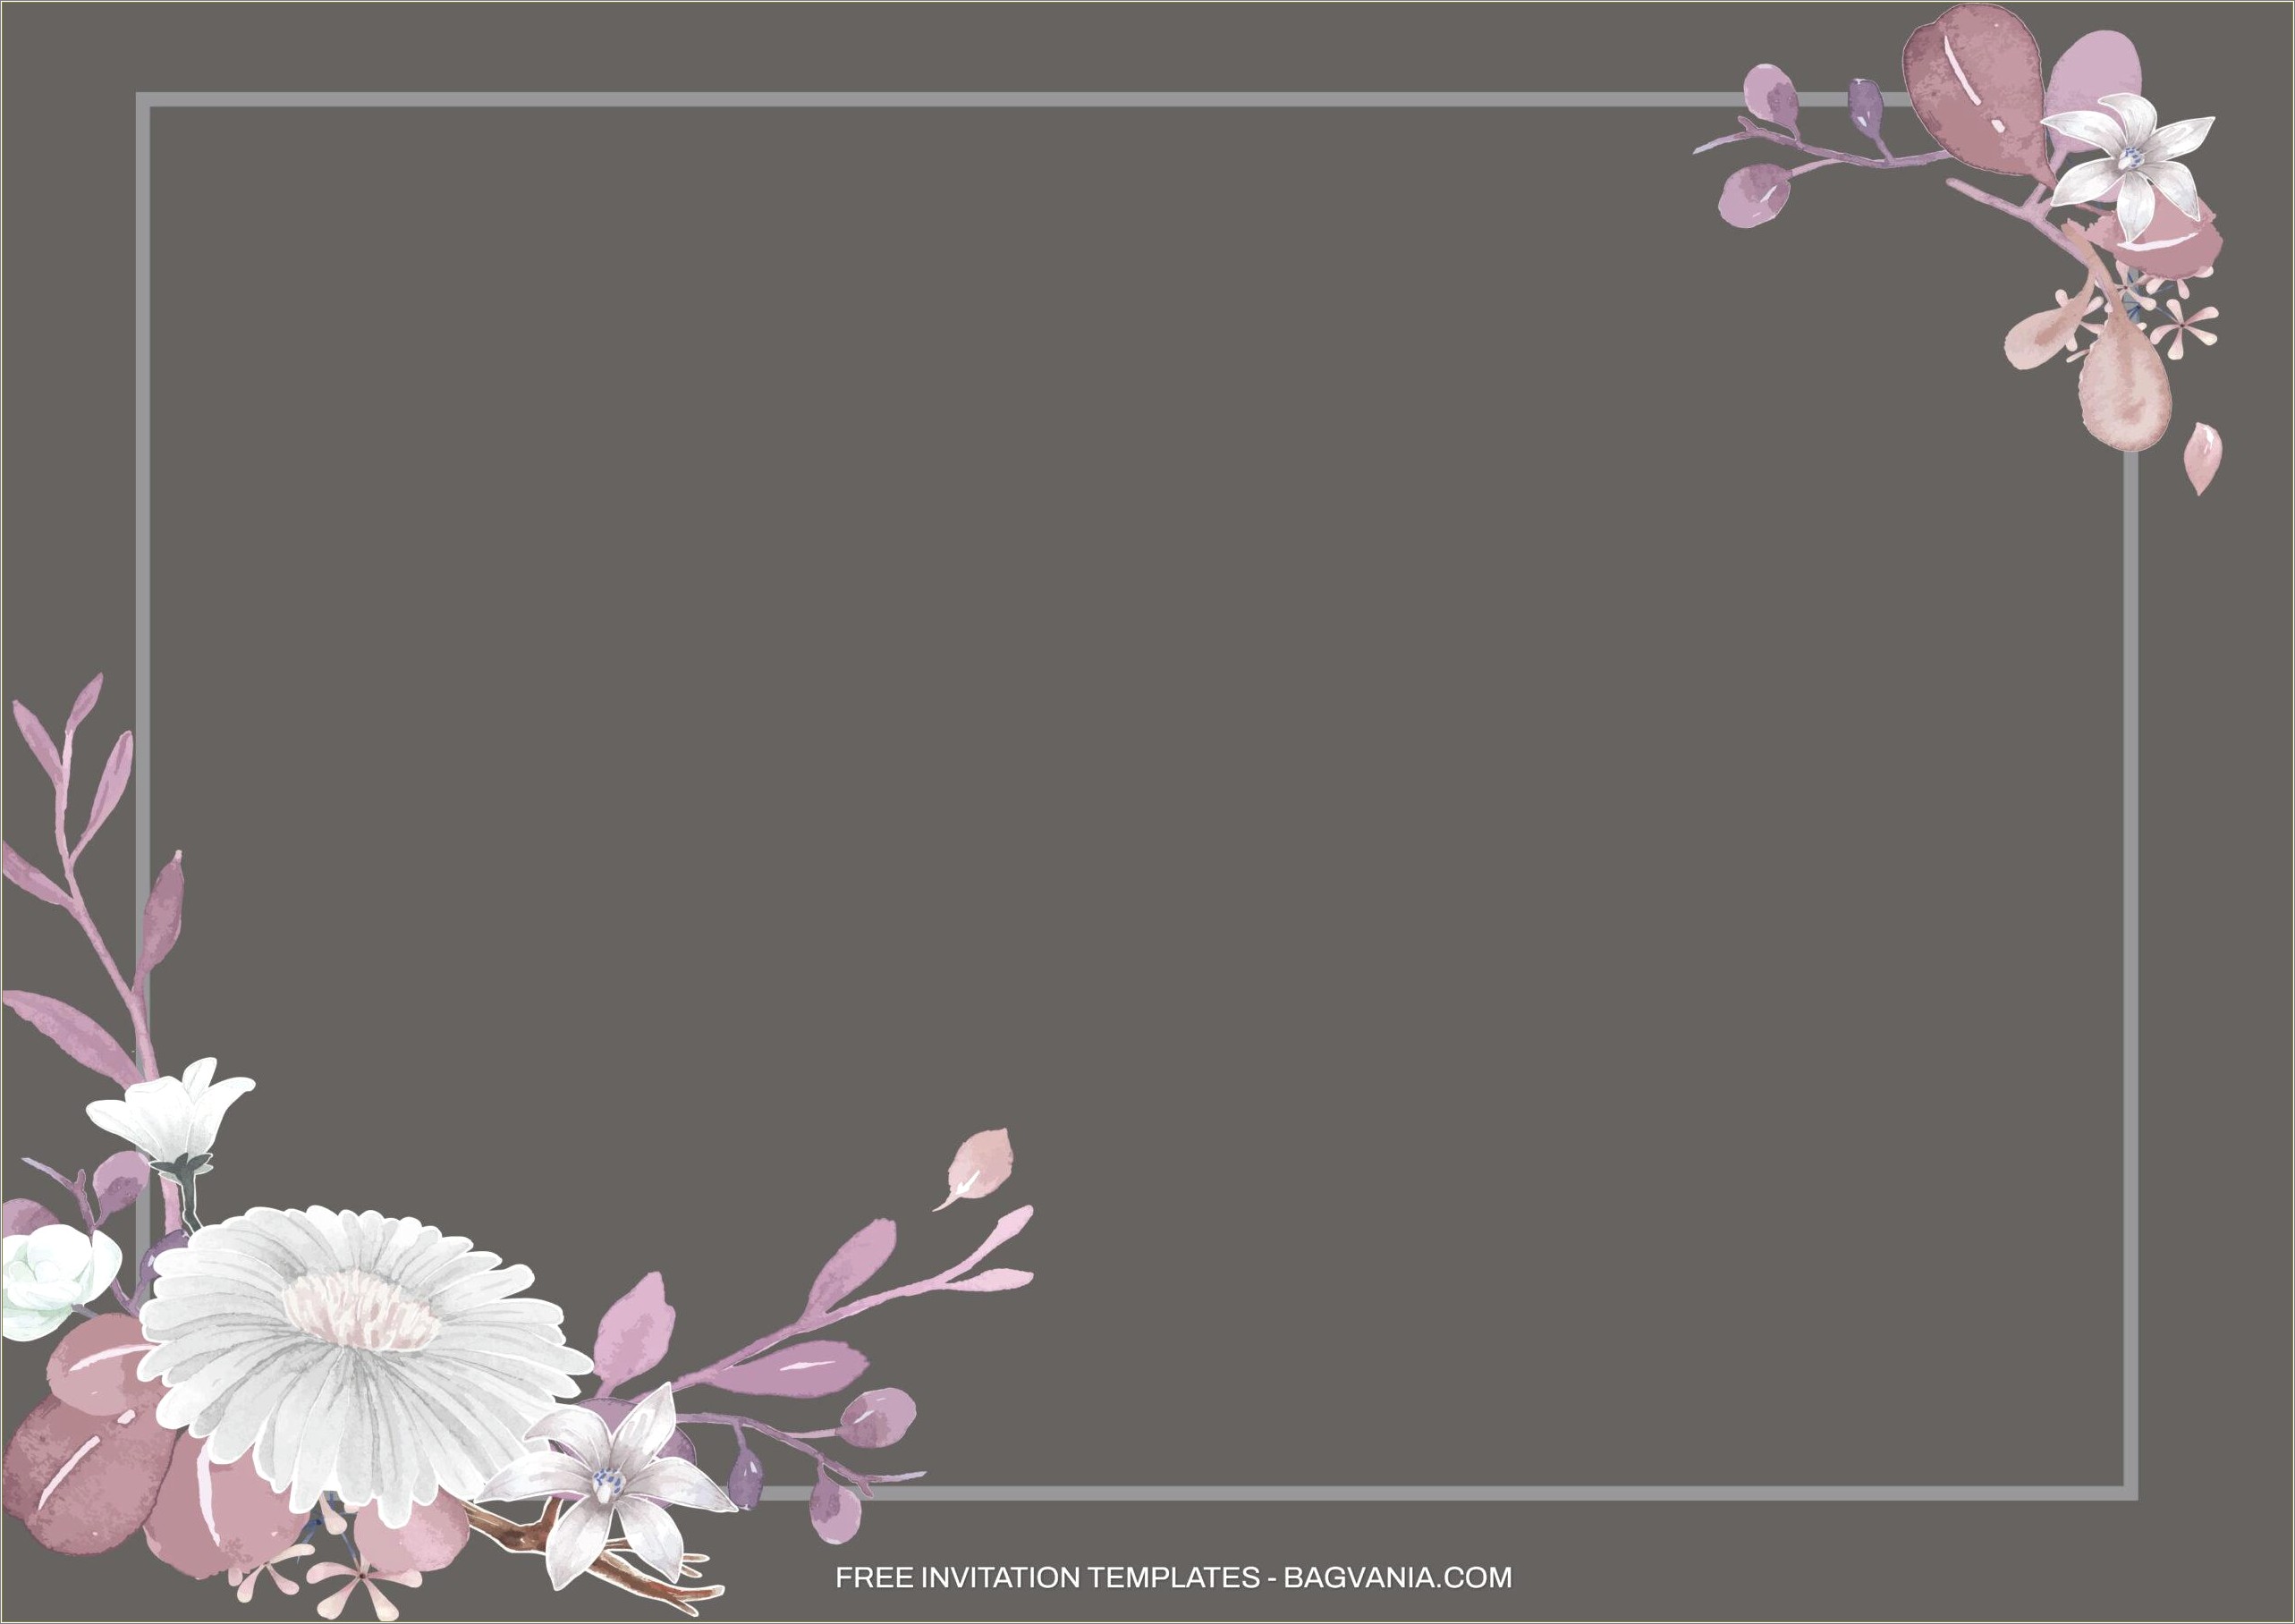 Free Wedding Invitation Templates For Word Philippines